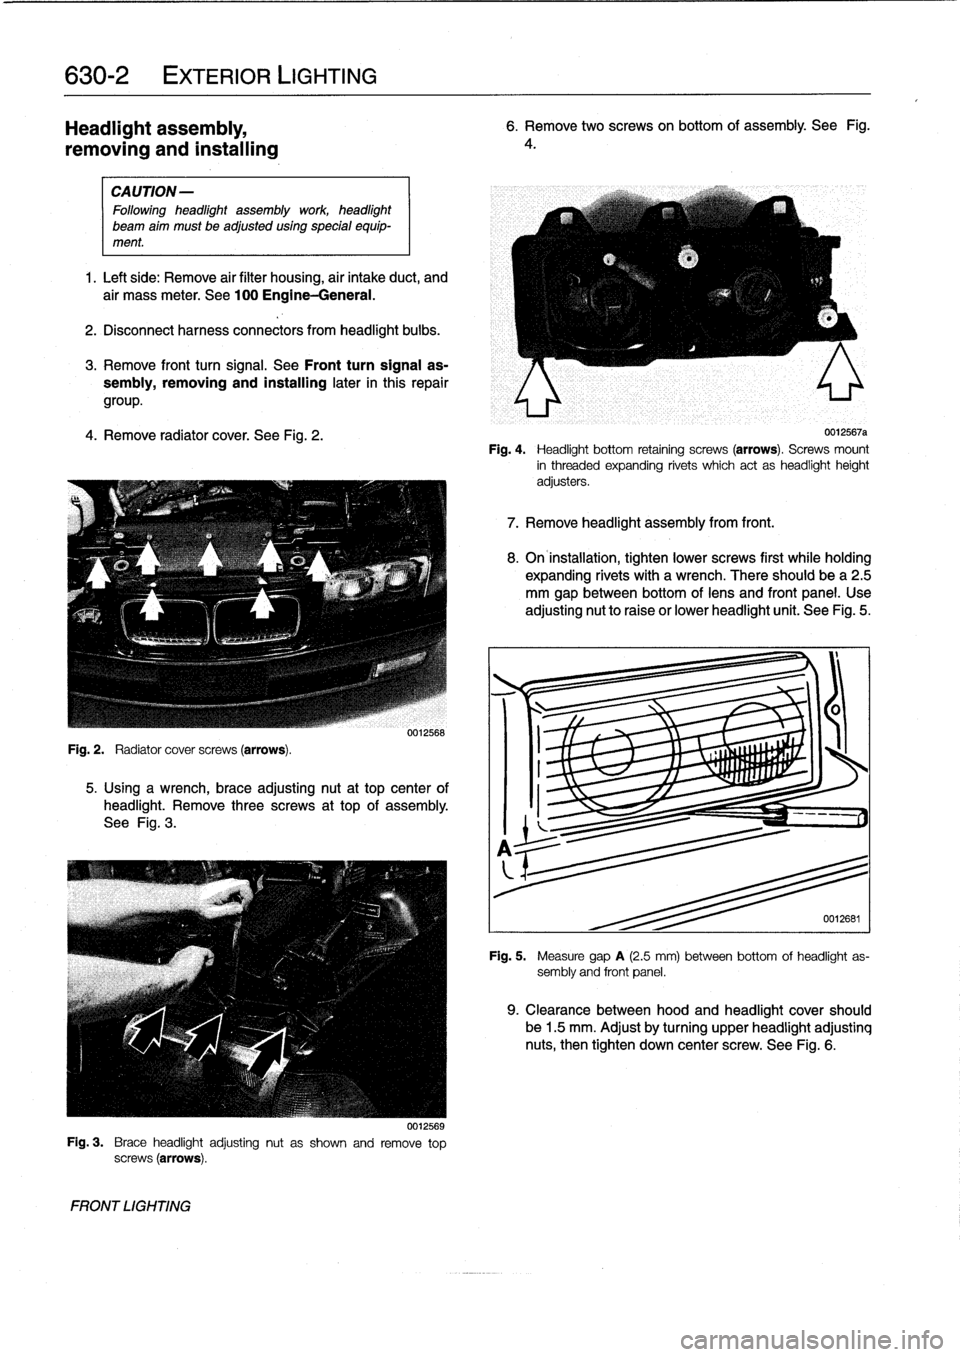 BMW 318i 1998 E36 Workshop Manual 
630-2

	

EXTERIOR
LIGHTING

Headlight
assembly,

removing
and
installing

CAUTION-

Followingheadlight
assembly
work
headlight

beam
aim
must
be
adjusted
using
special
equip-
ment
.

1
.
Left
side
: